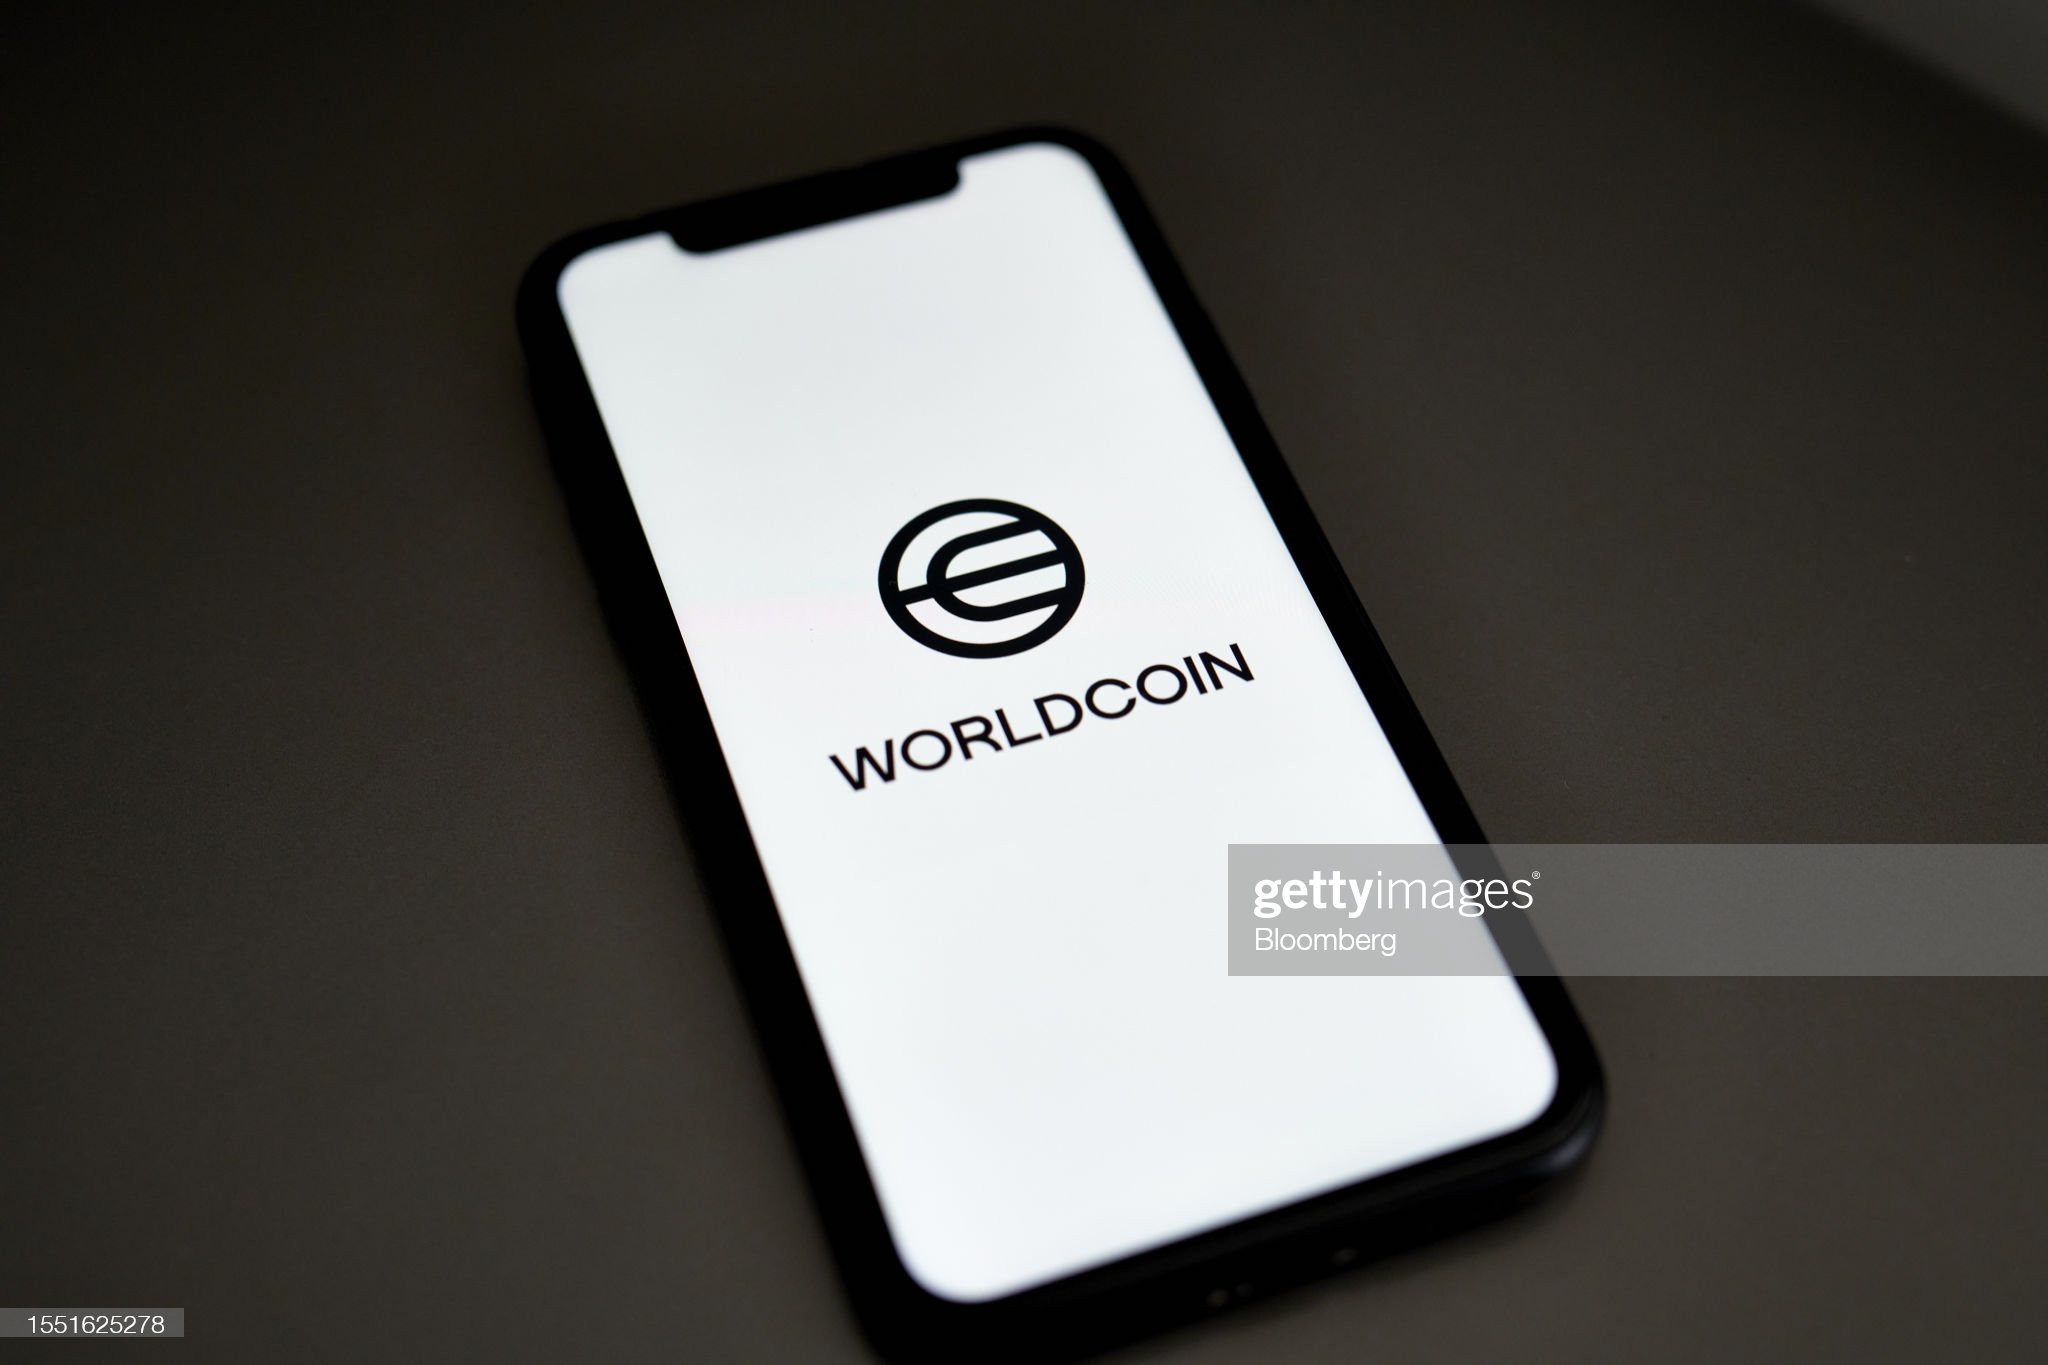 The Worldcoin logo on a smartphone arranged in Germantown, New York, US, on Monday, July 24, 2023. Worldcoin, the digital identity and crypto payments project co-founded by OpenAI Chief Executive Officer Sam Altman, launched on Monday. Photographer: Gabby Jones/Bloomberg via Getty Images